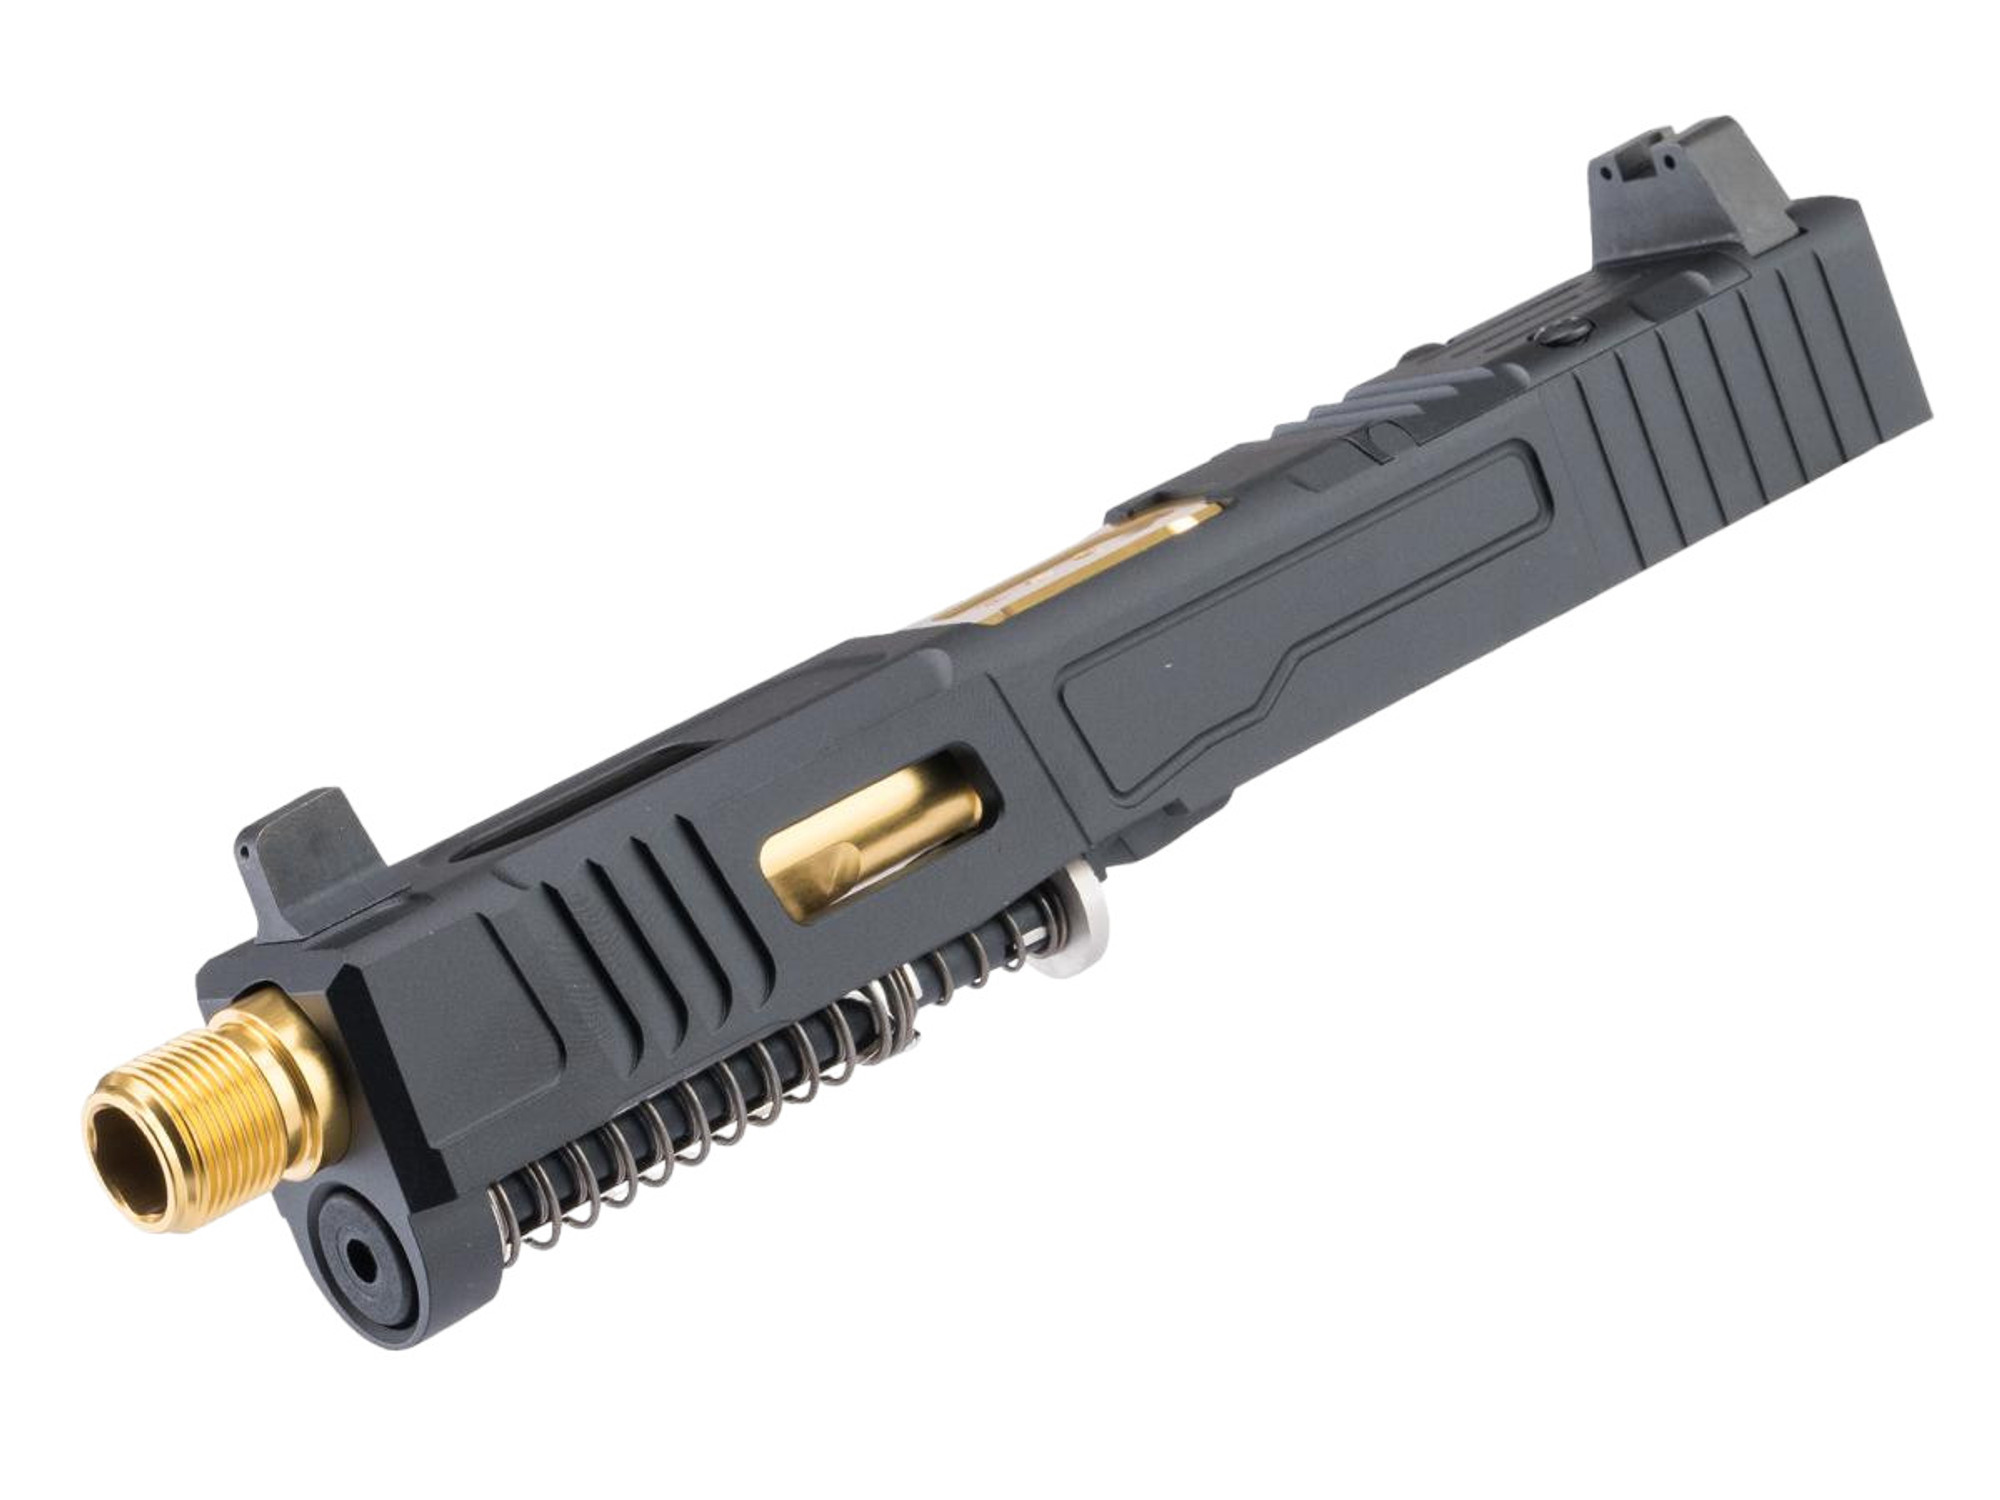 VFC Fowler Industries Licensed MKII Complete Slide Assembly for GLOCK Gas Blowback Airsoft Pistols (Model: GLOCK 19X / G45 / Aluminum)